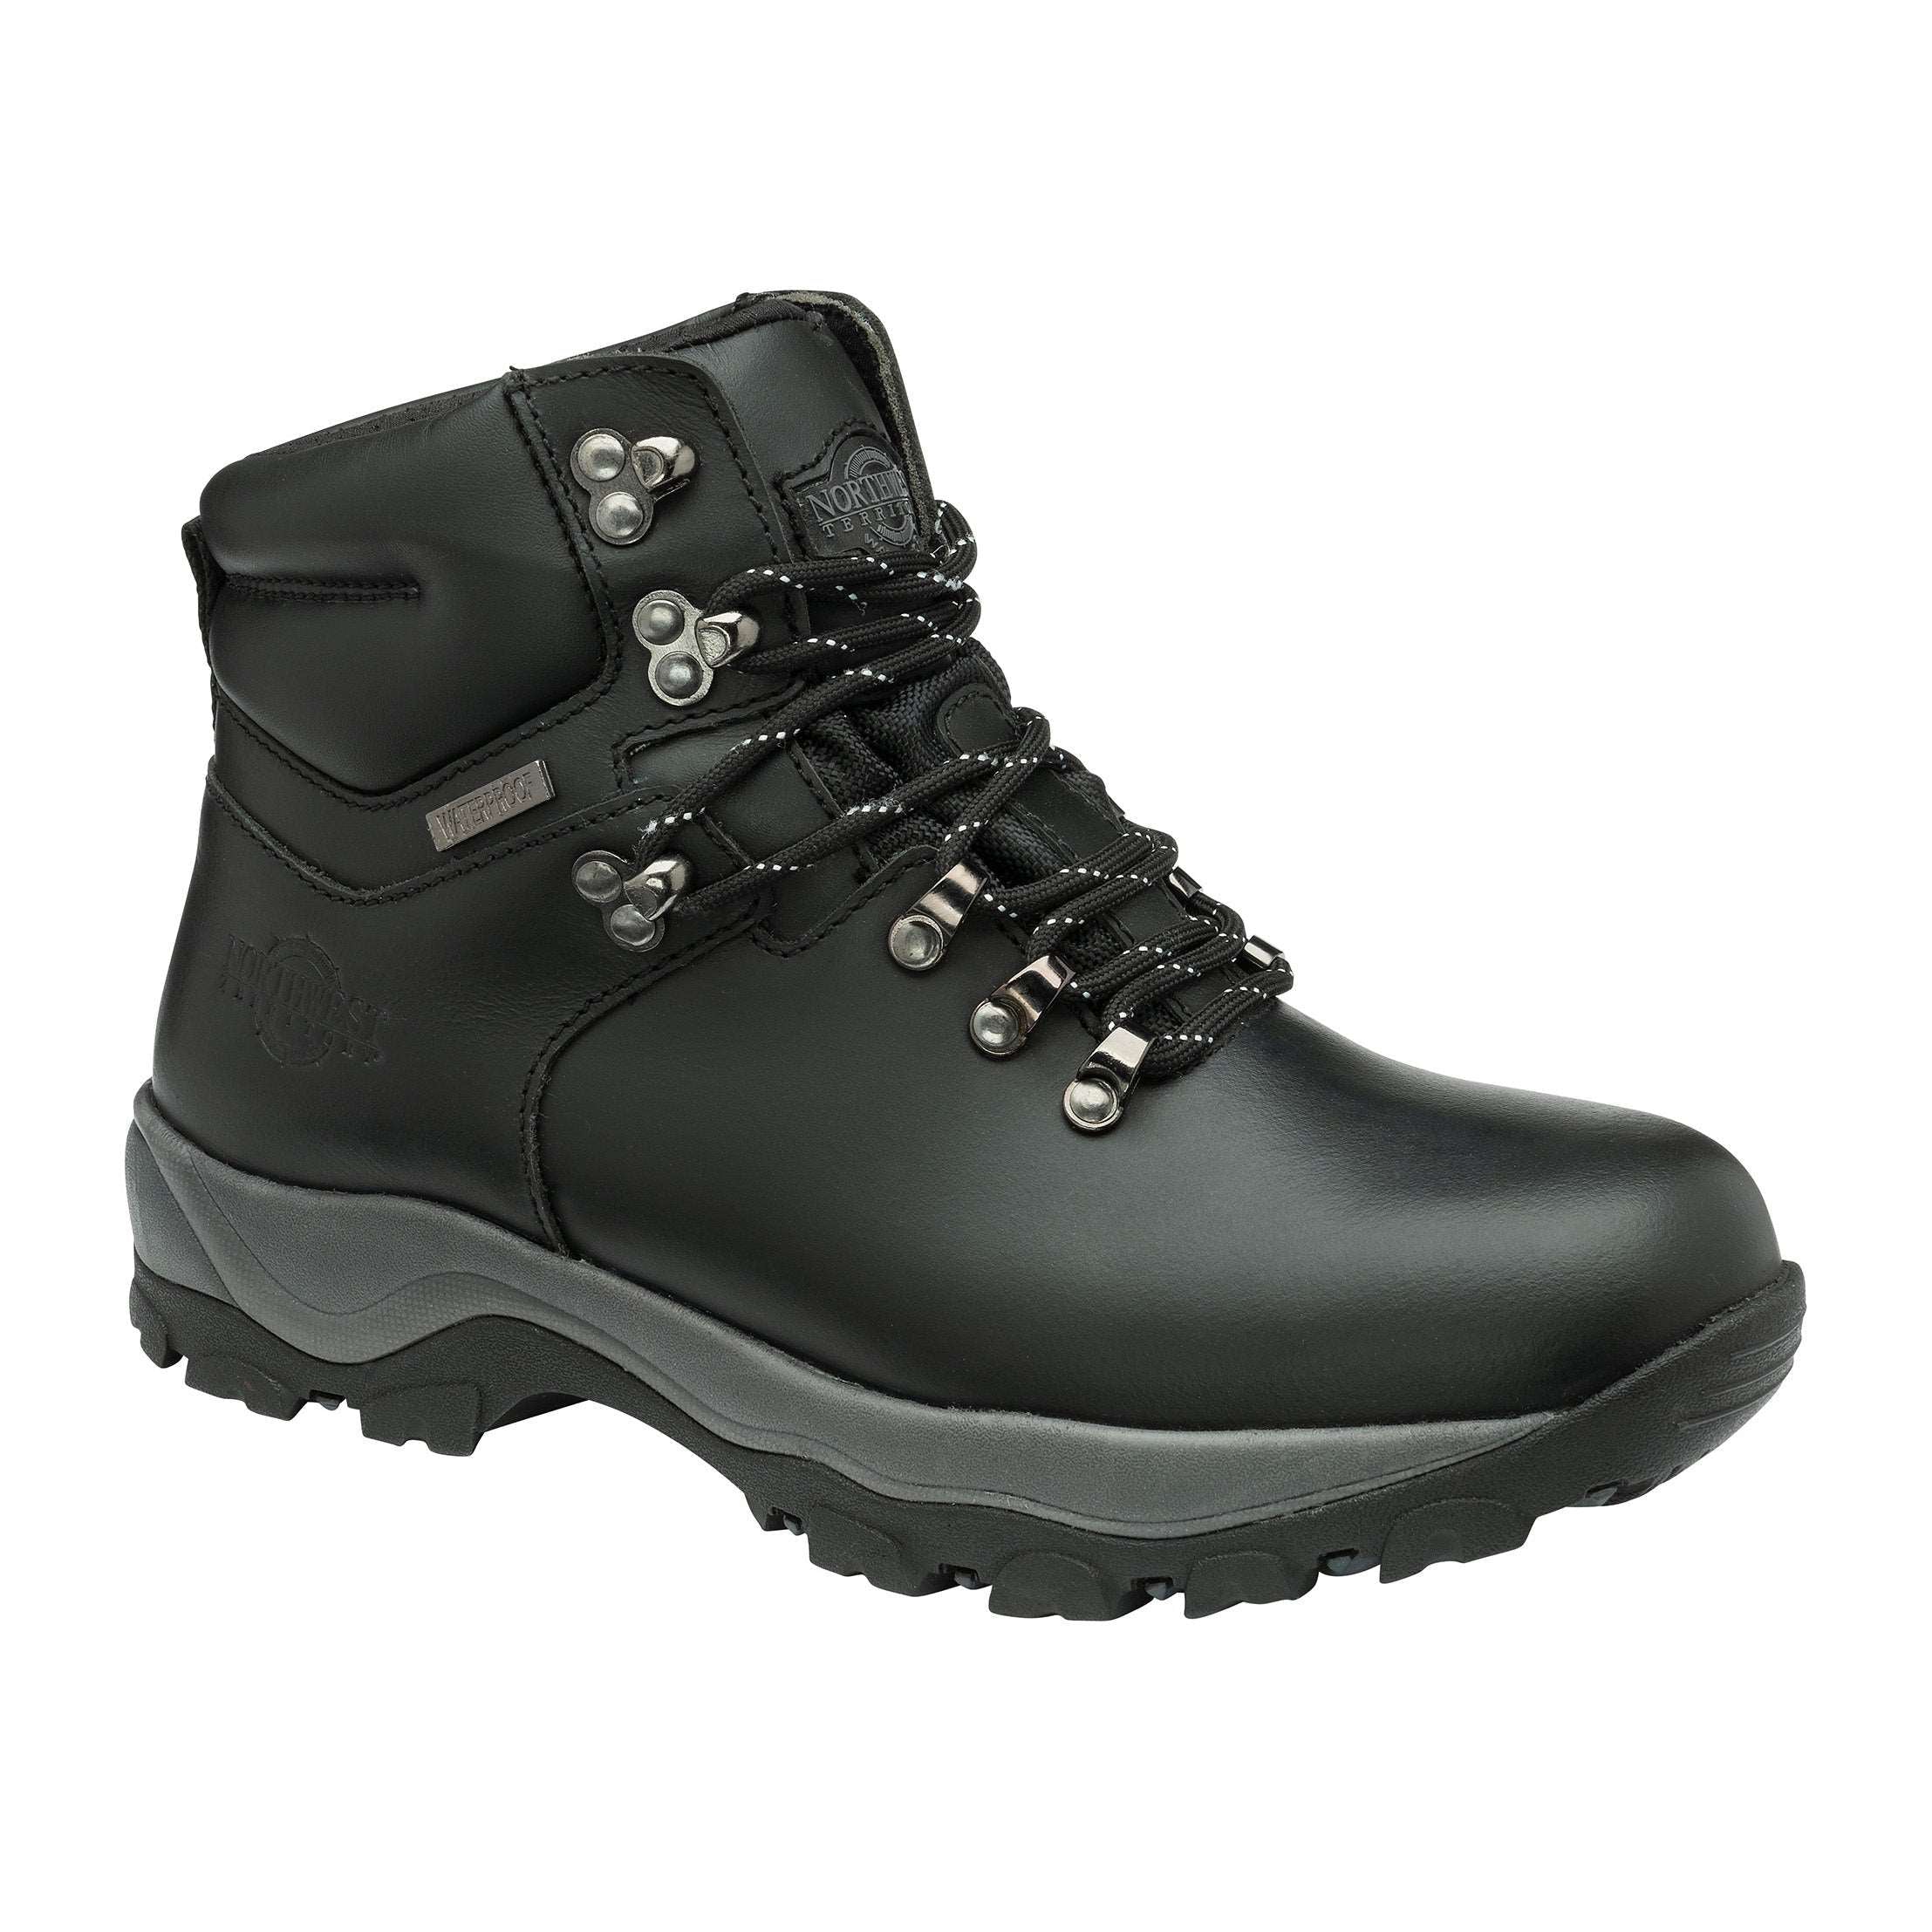 Creston Leather Waterproof Walking And Hiking Boots